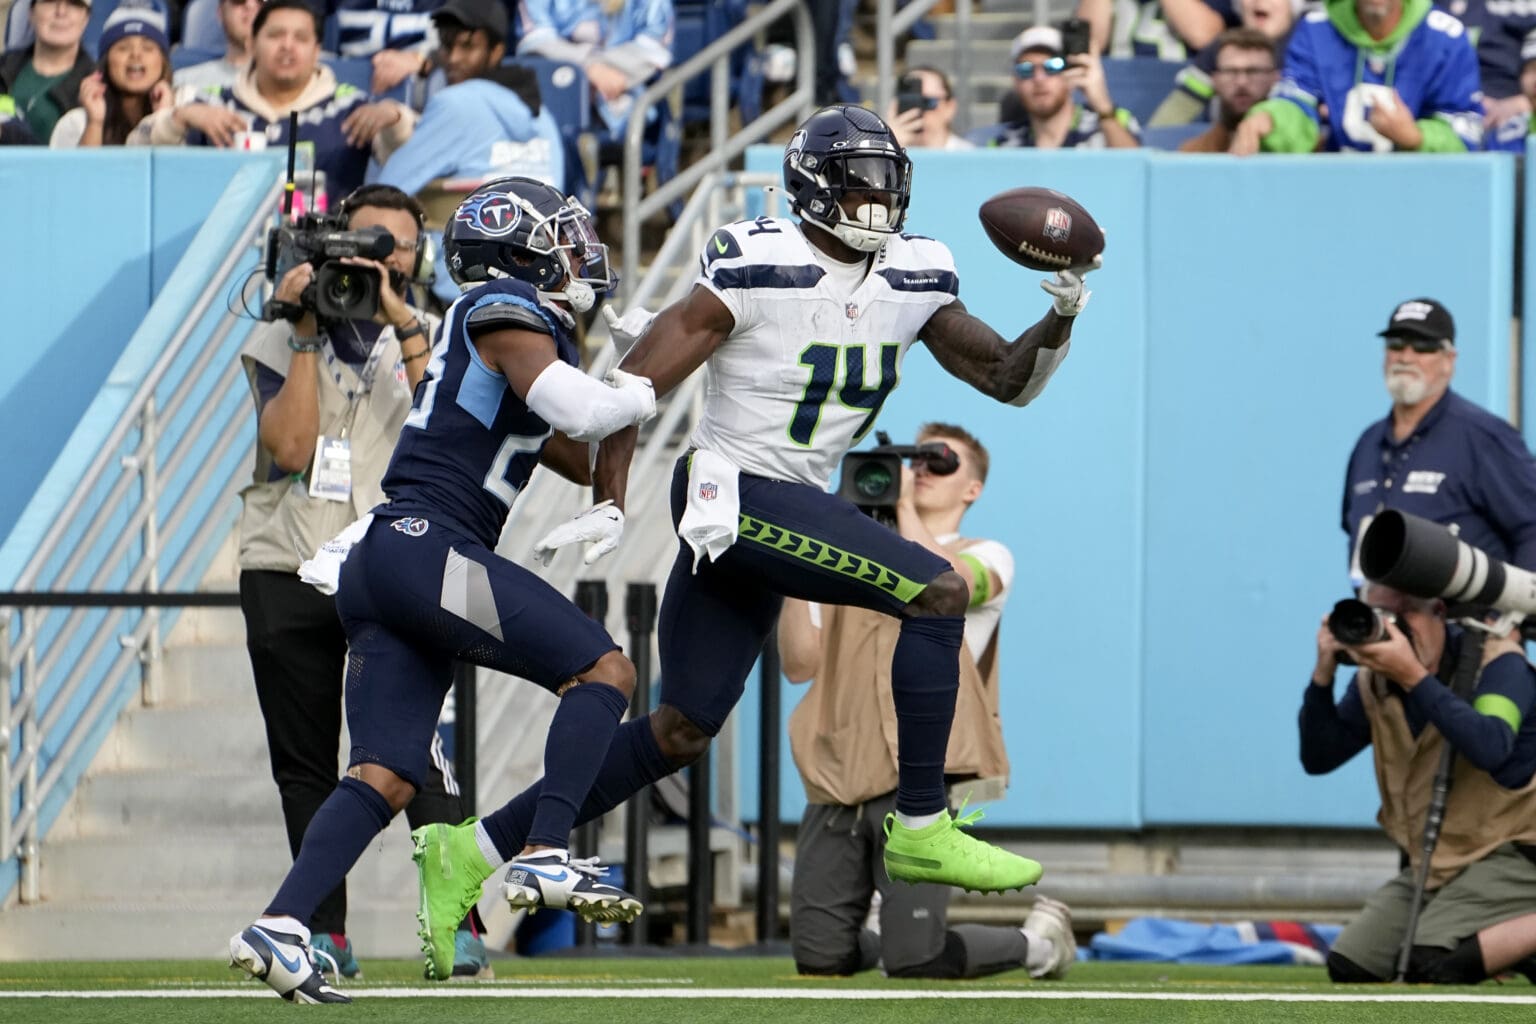 Seattle Seahawks wide receiver DK Metcalf catches a touchdown pass in front of Tennessee Titans cornerback Tre Avery as he attempts to grab onto DK Metcalf to stop him.